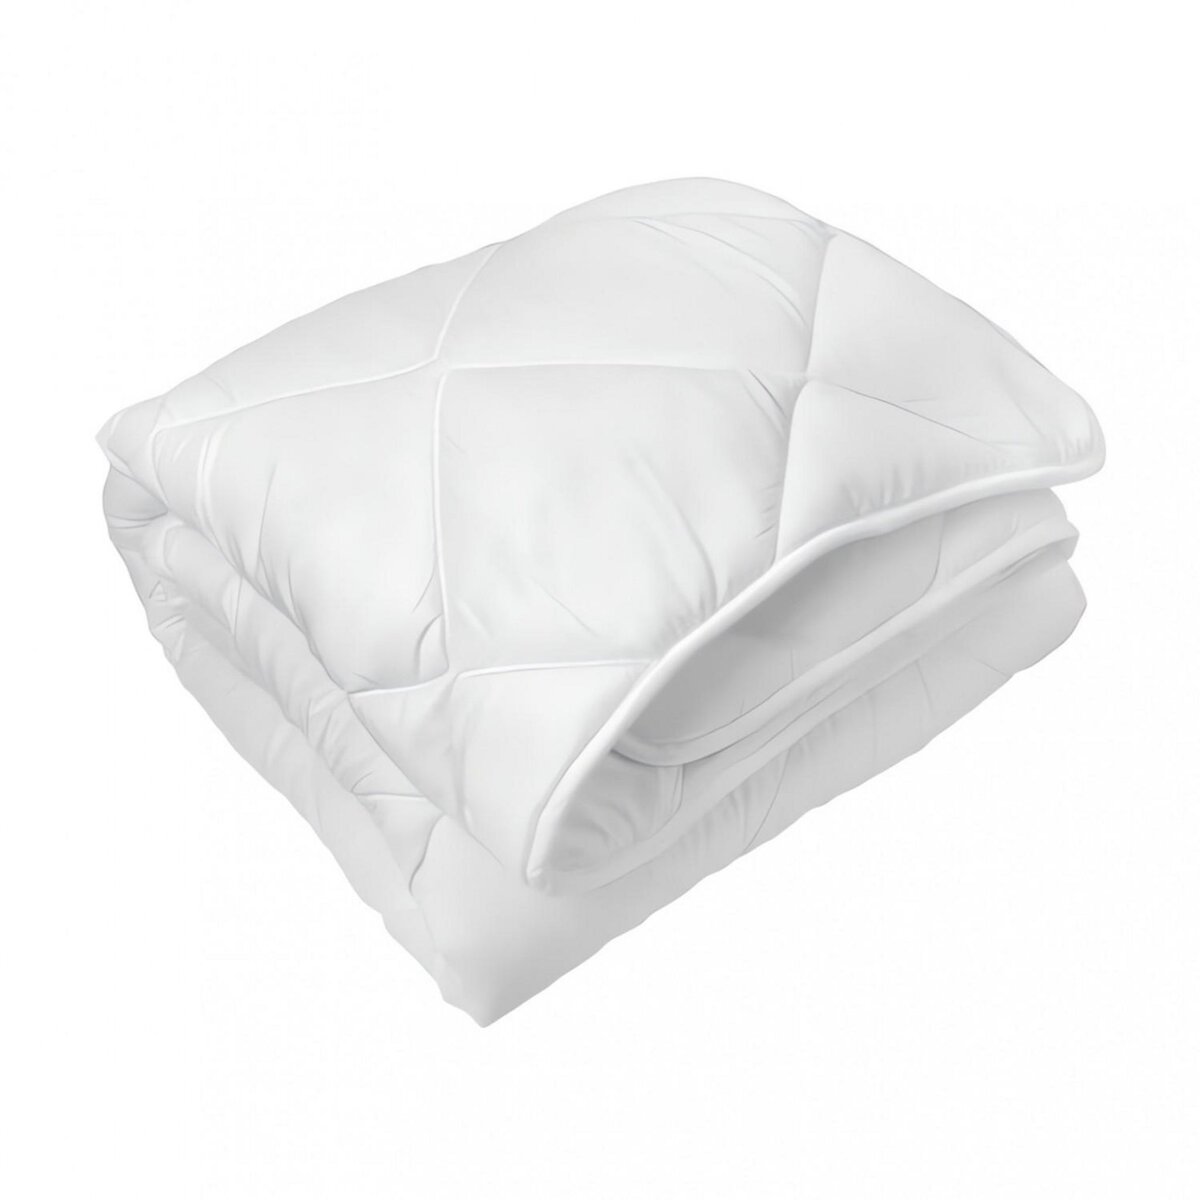 Toison d'or Couette blanche 220x240 cm COCOON 400Gr/m2